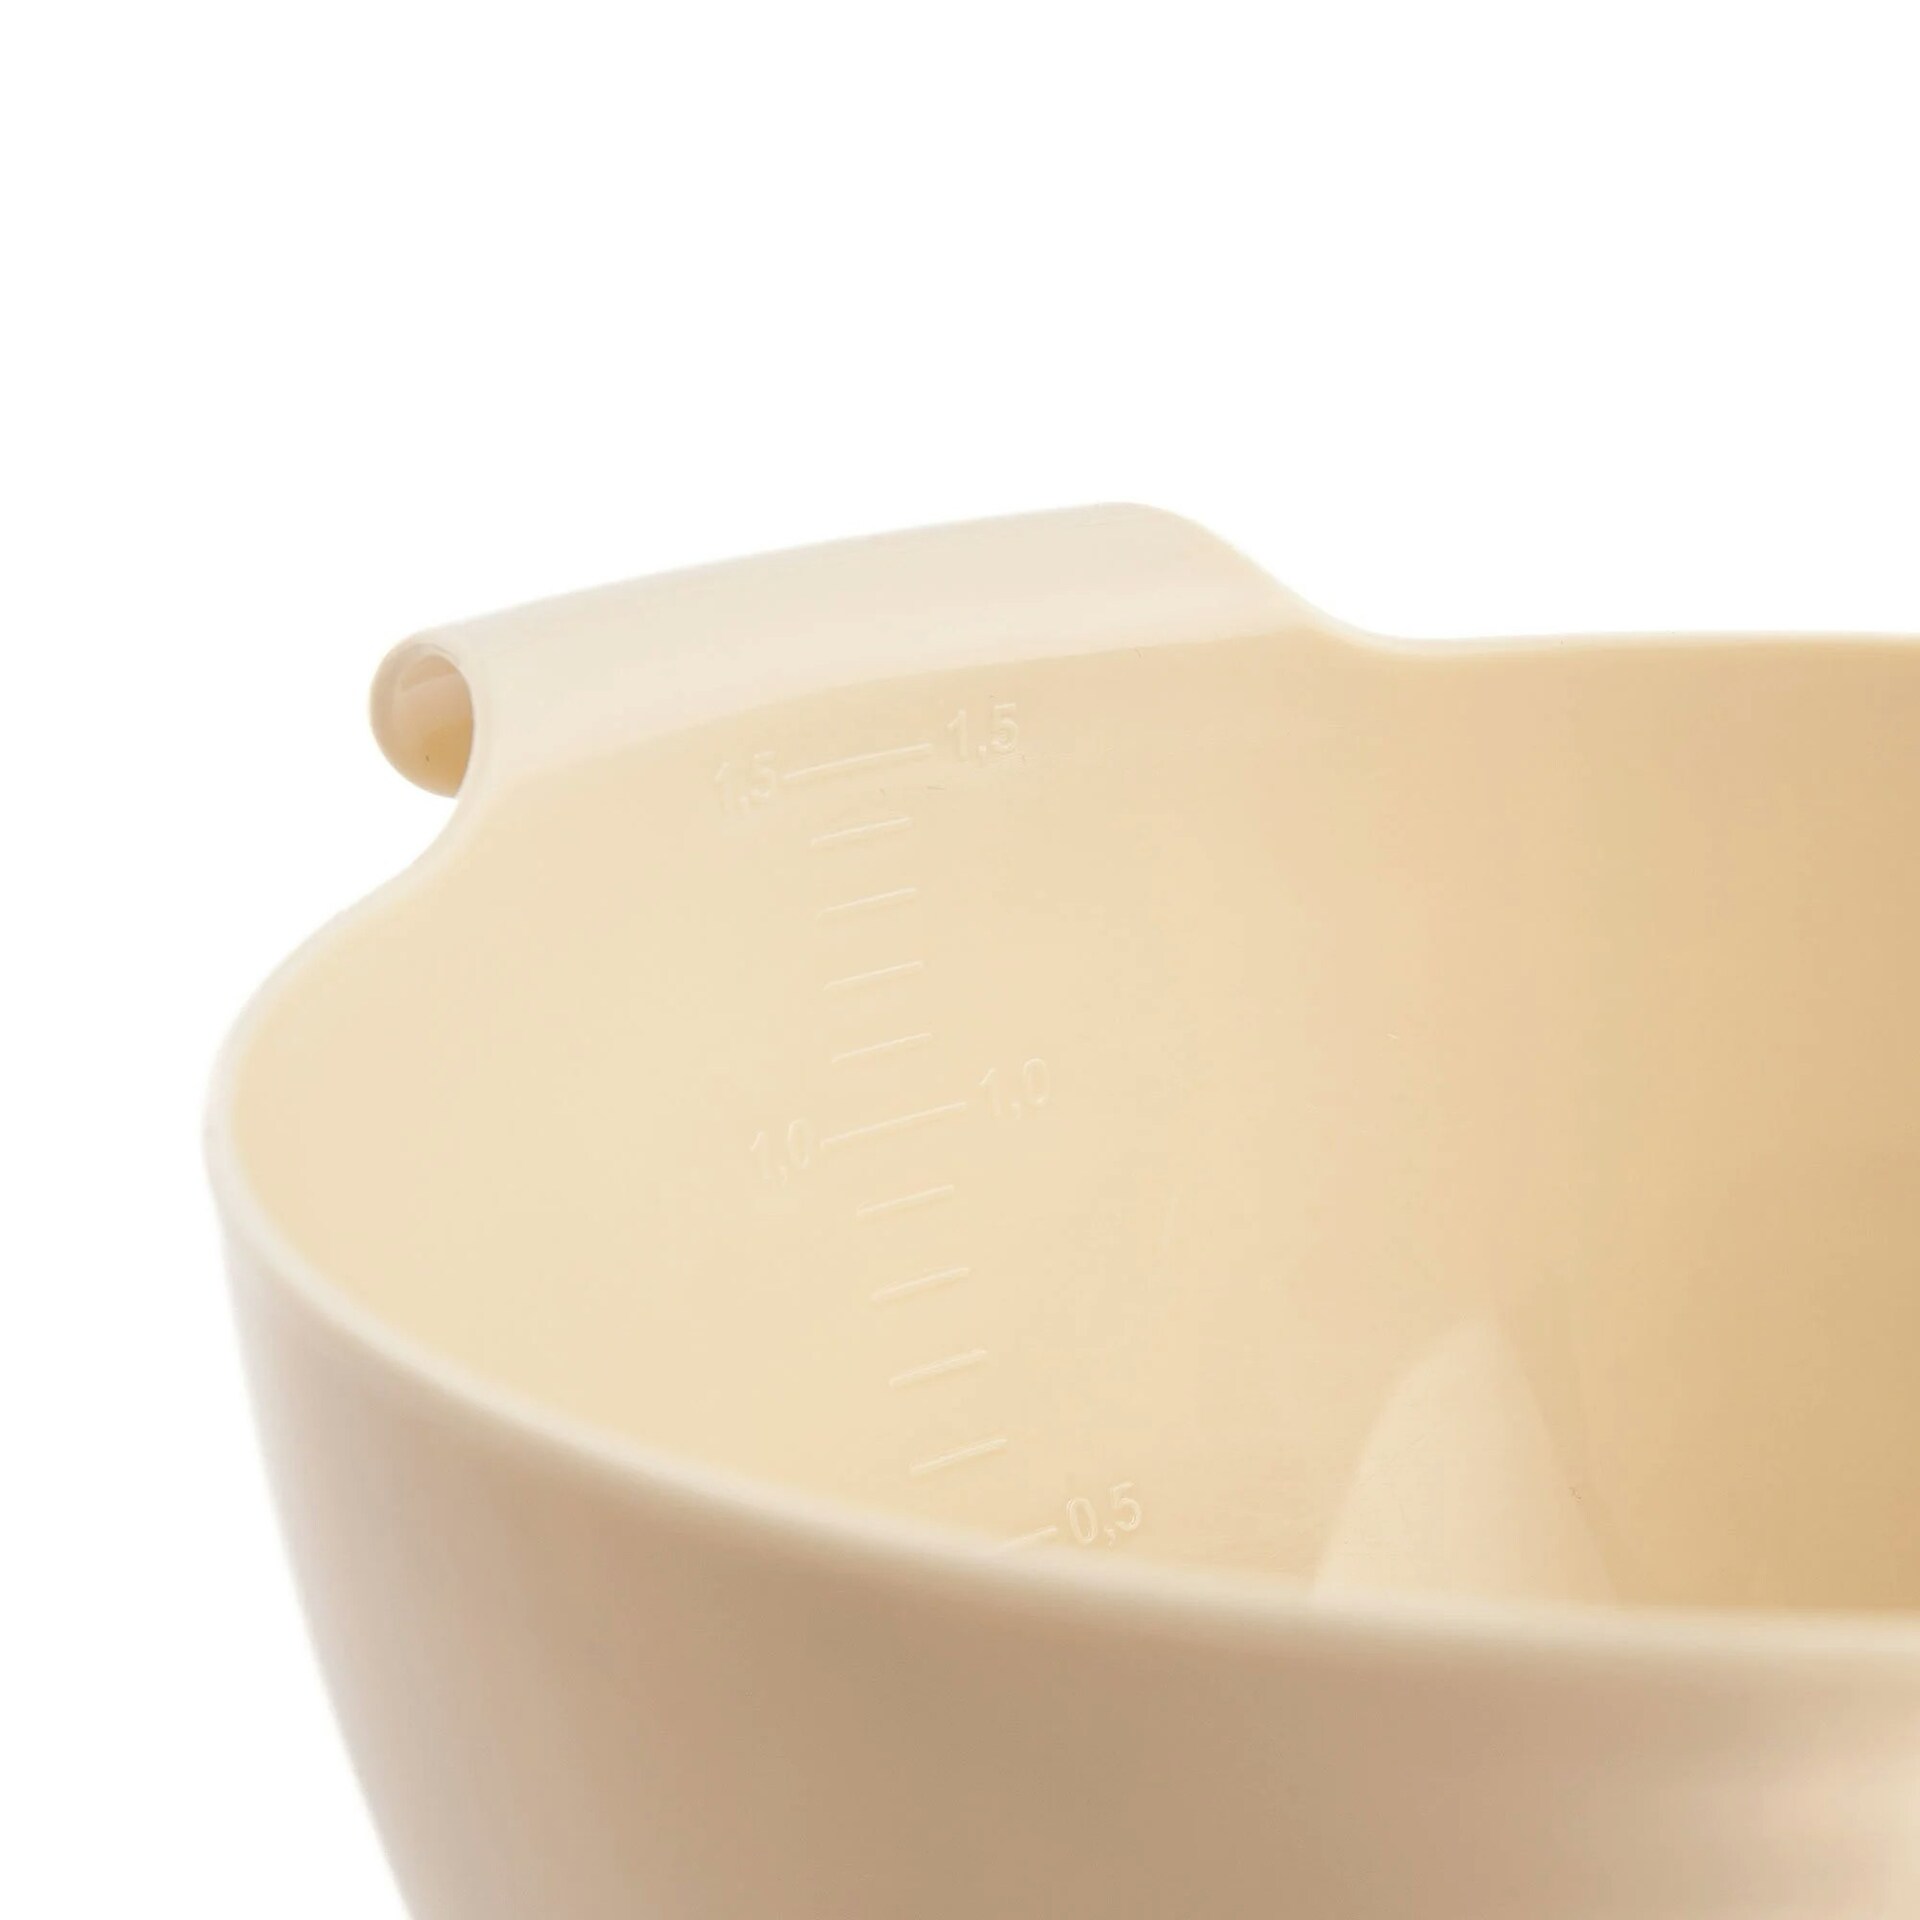 Mixing Bowl With Lid 3-pack Stainless Steel - Mareld @ RoyalDesign